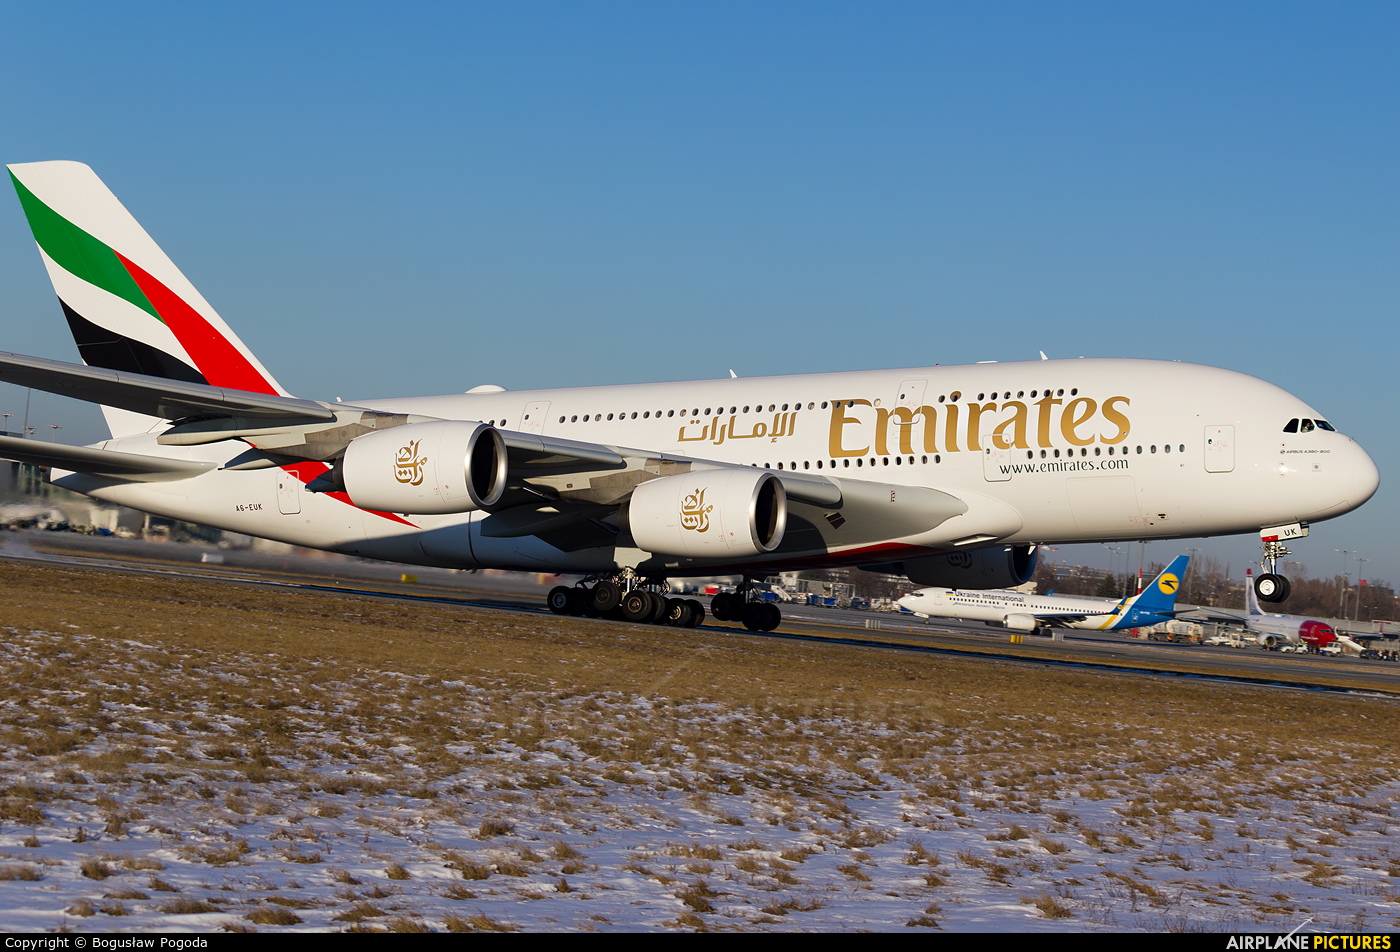 Emirates Airlines A6-EUK aircraft at Warsaw - Frederic Chopin